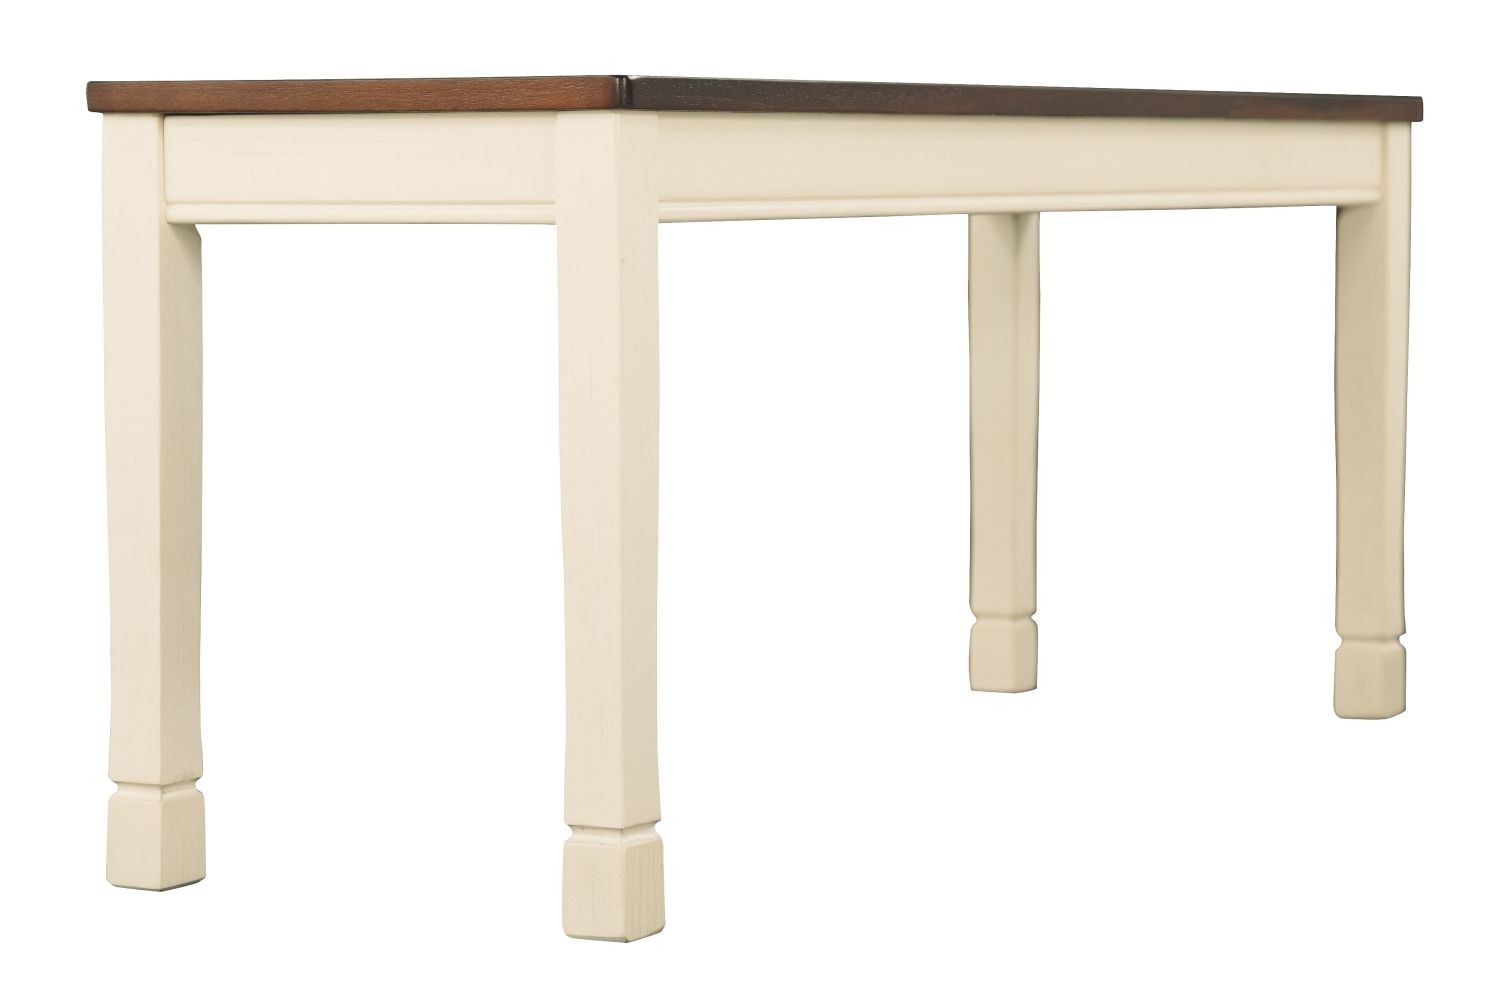 Whitesburg – Brown / Cottage White – Large Dining Room Bench D583-00